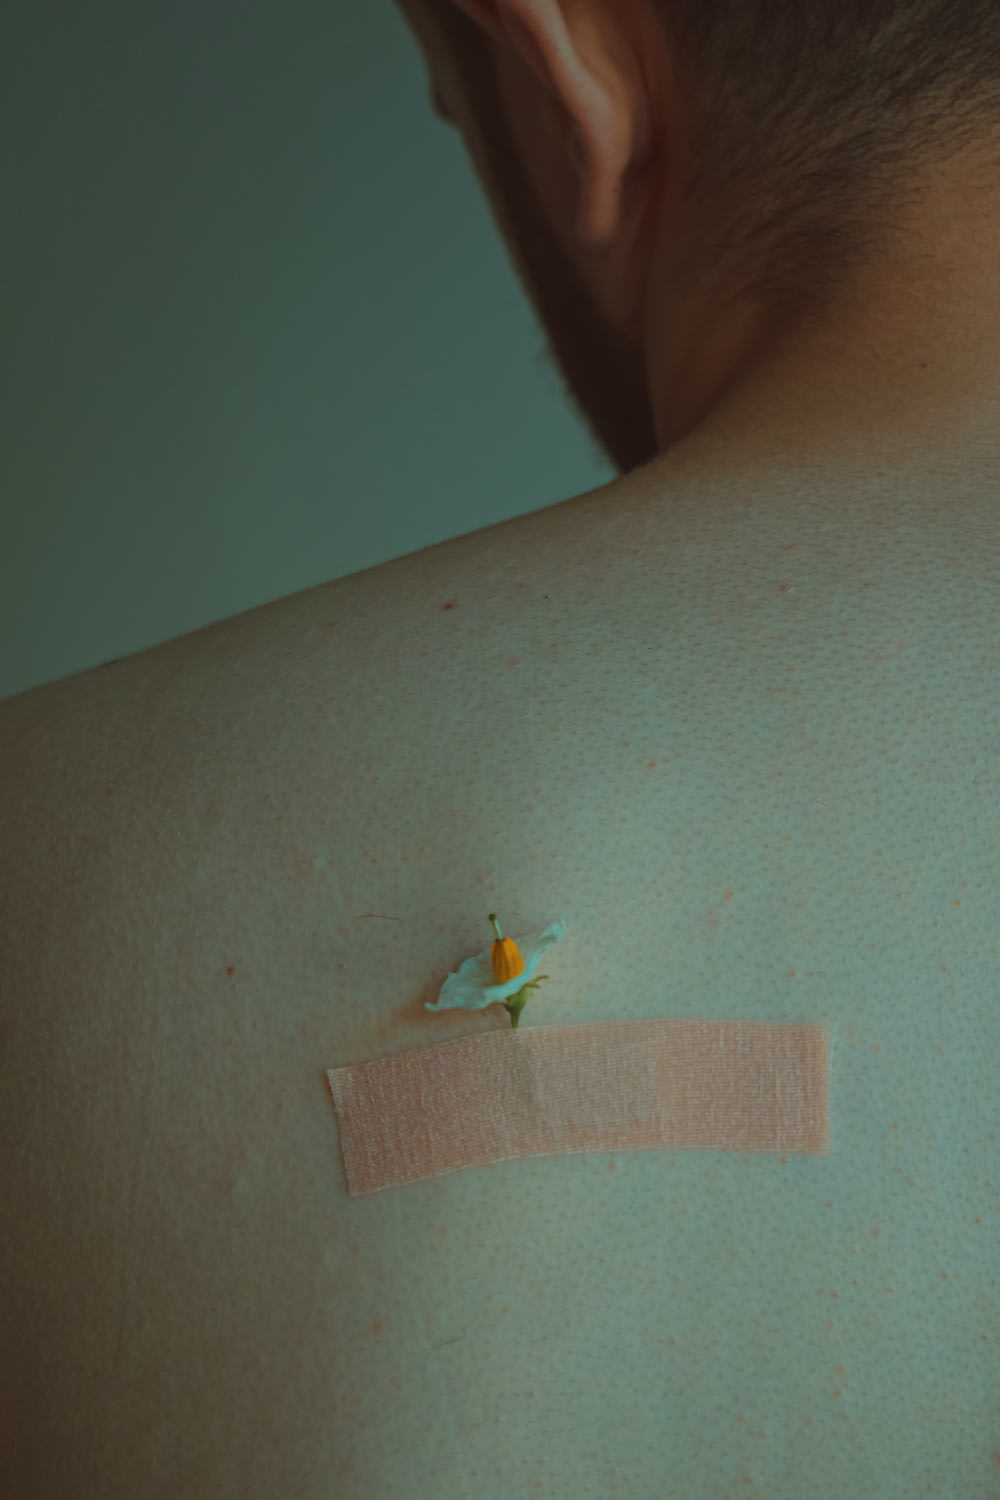 a man with a patch on his back with a flower on it